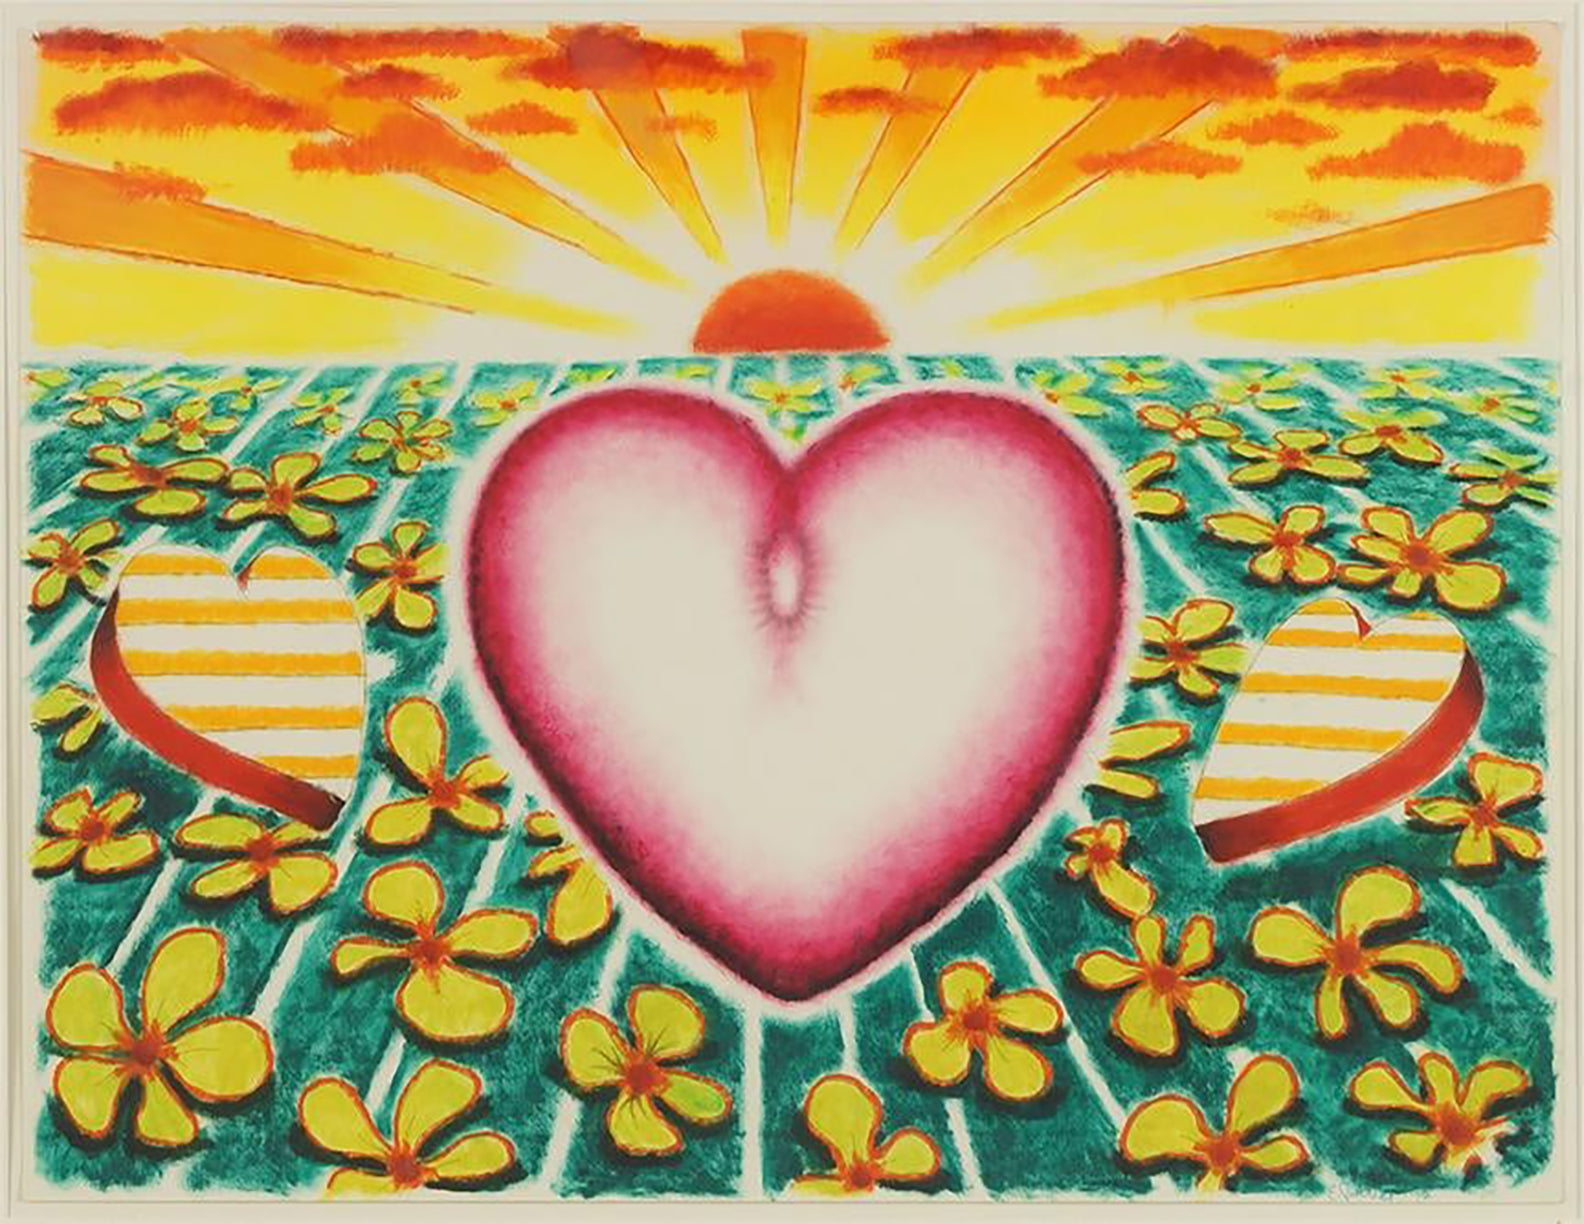 Ed Paschke - Heart and Flowers 1972